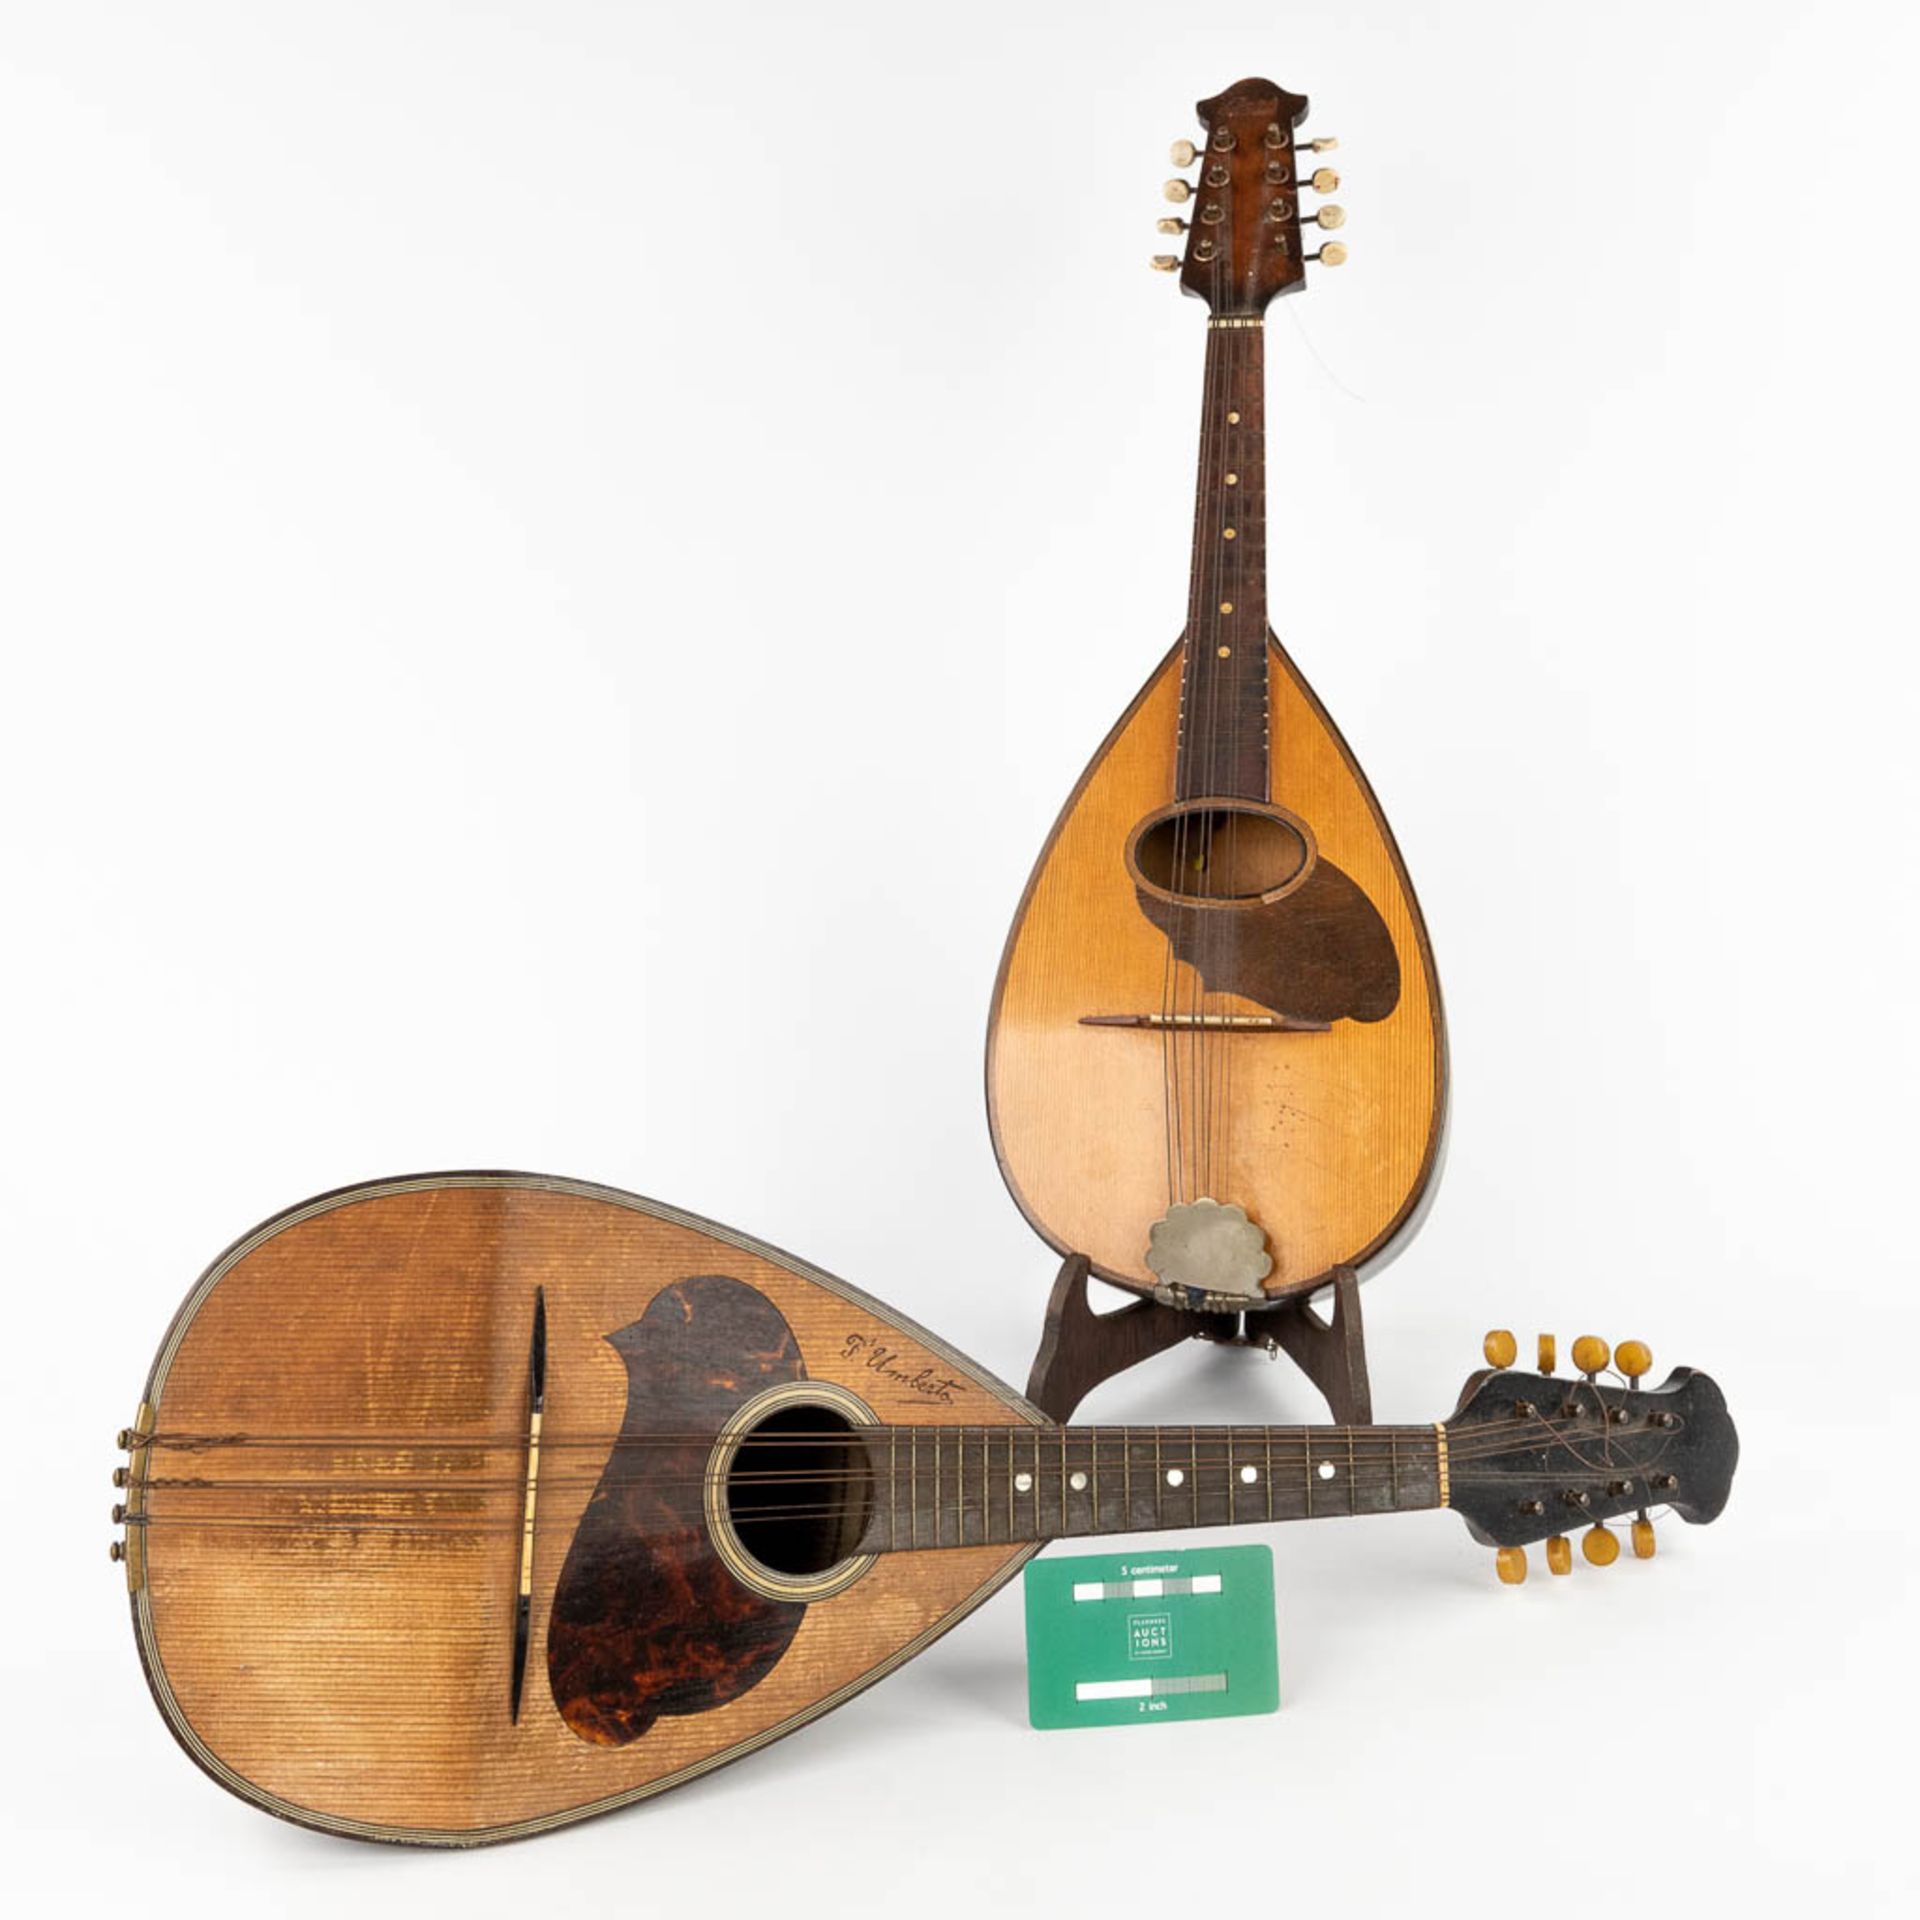 Two mandolines, of which one is marked Fratelli Umberto. (L:20 x W:60 x H:14 cm) - Image 2 of 20